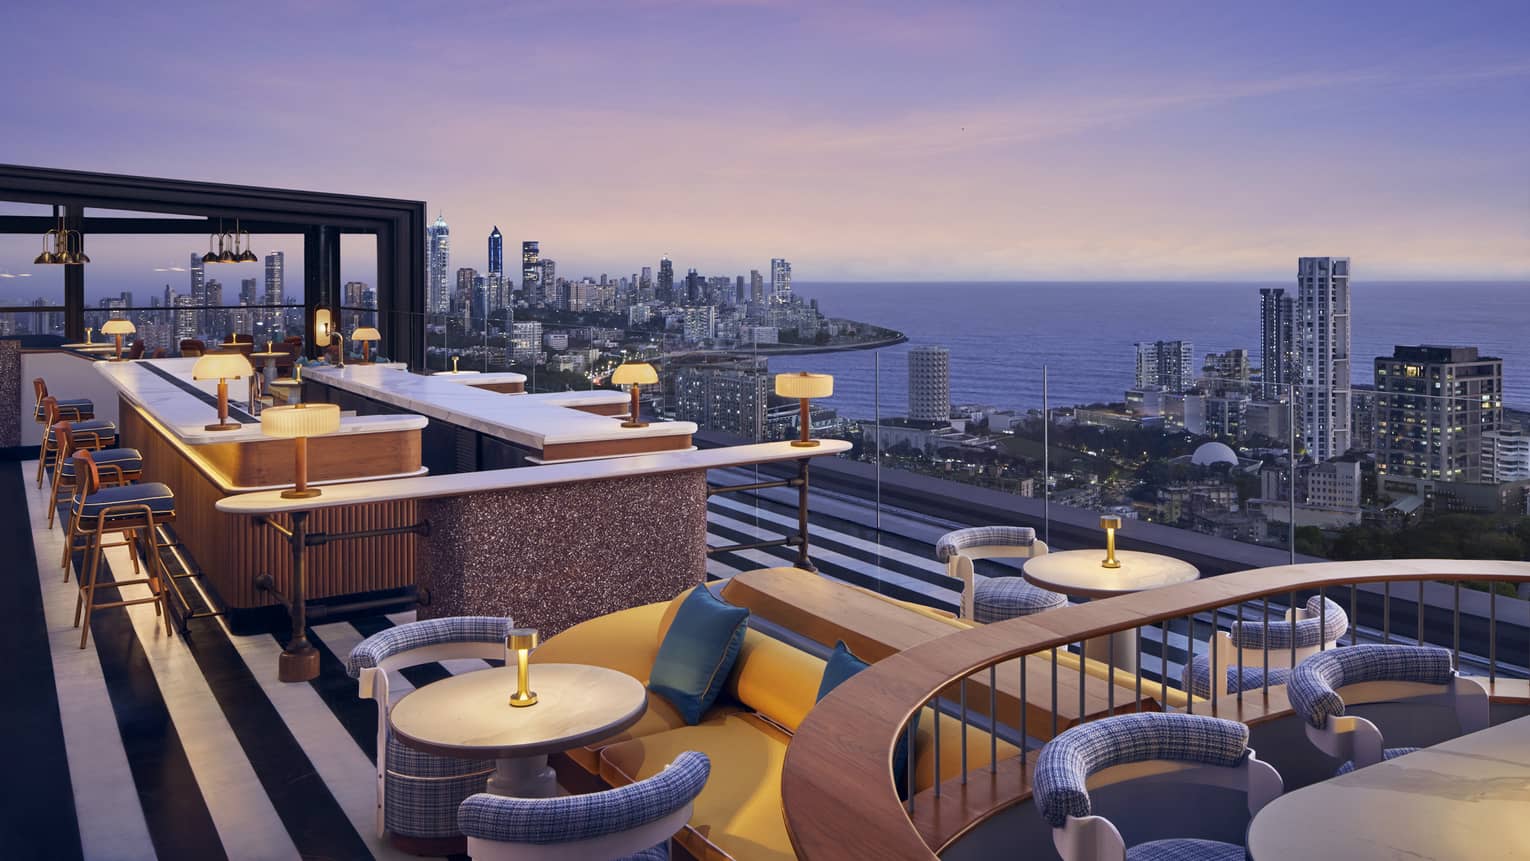 AER rooftop lounge at dusk with views of Mumbai skyline